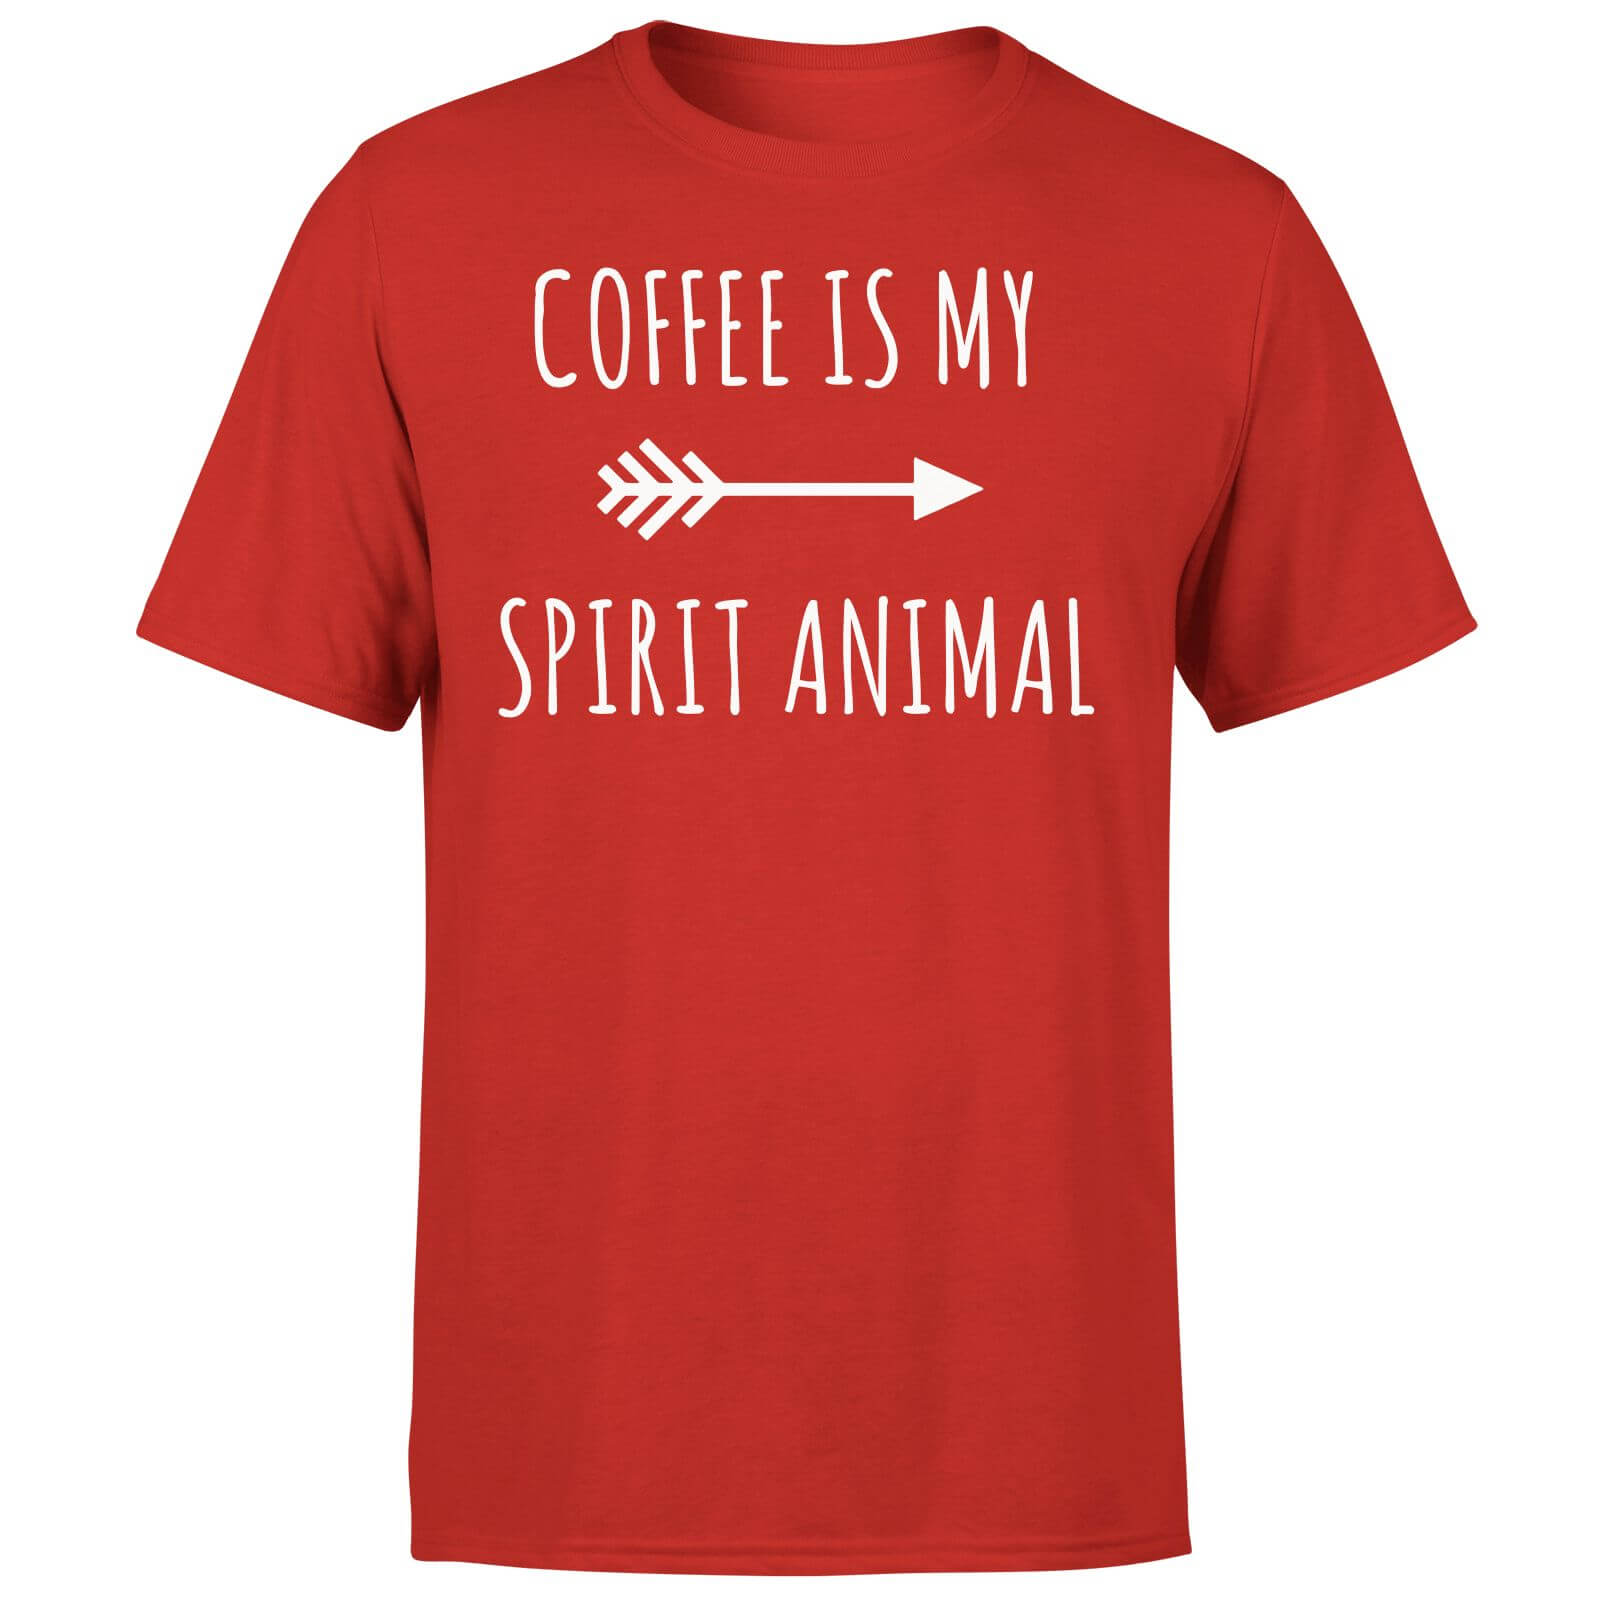 Coffee is my Spirit Animal T-Shirt - Red - S - Red